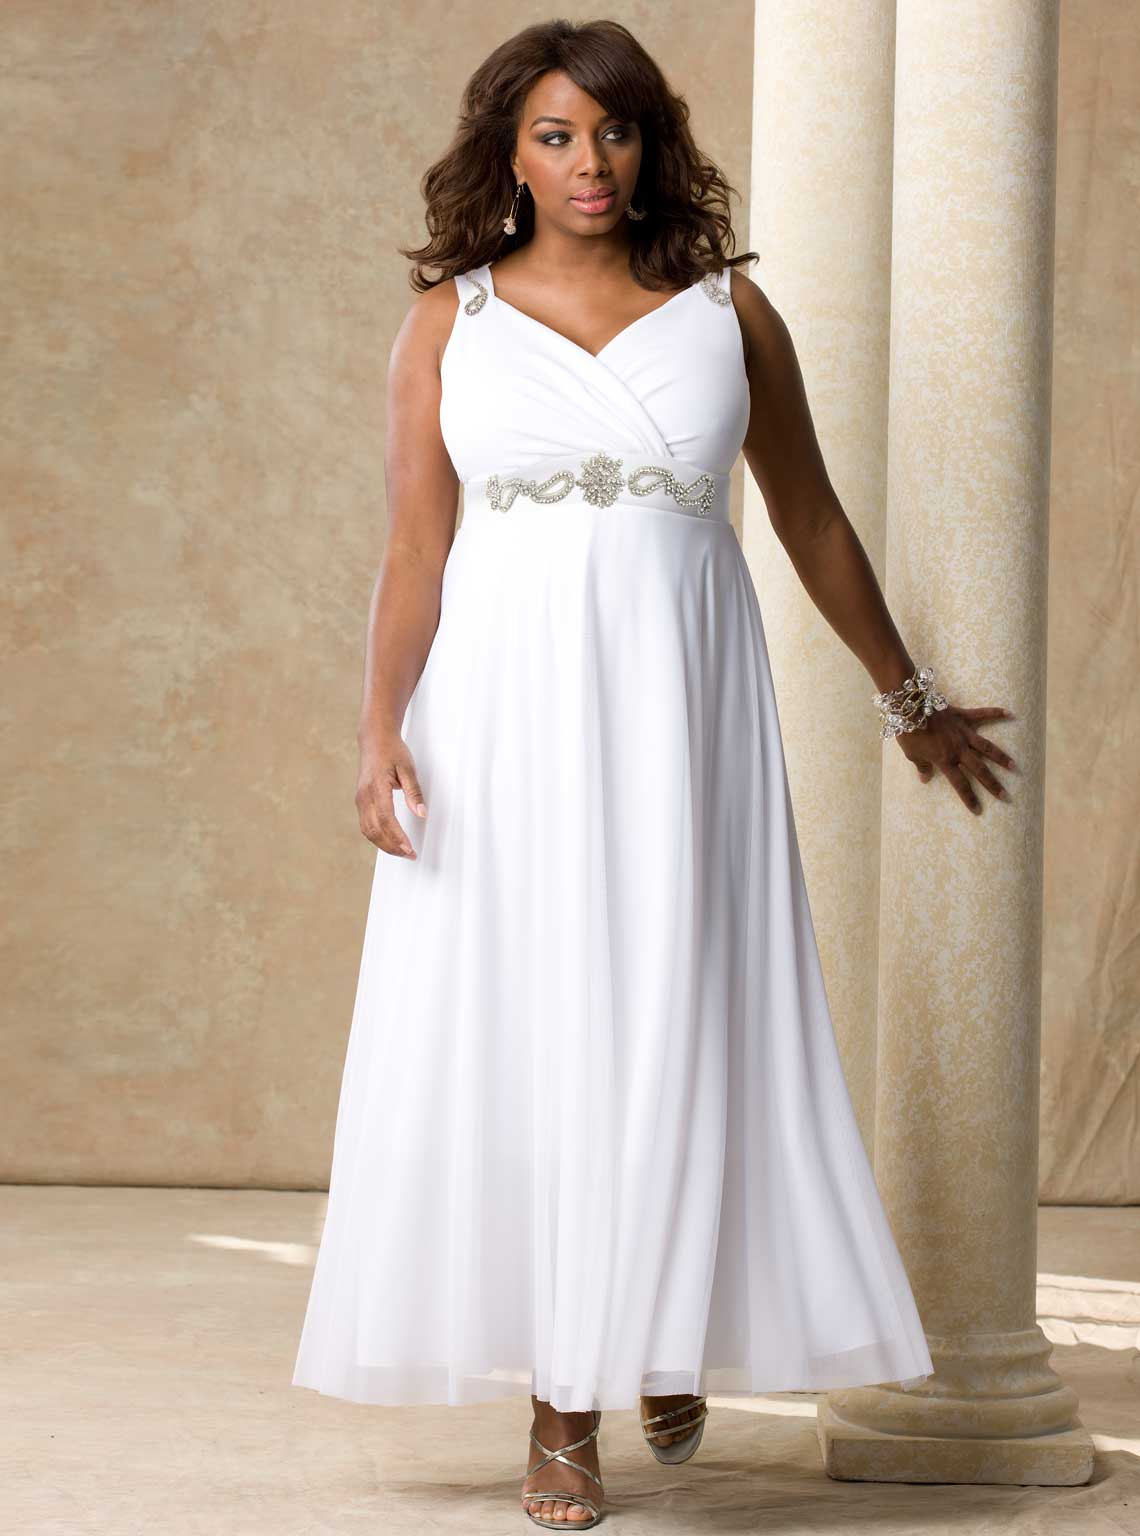 Plus Size Gowns For Real African Women | Mazirudo